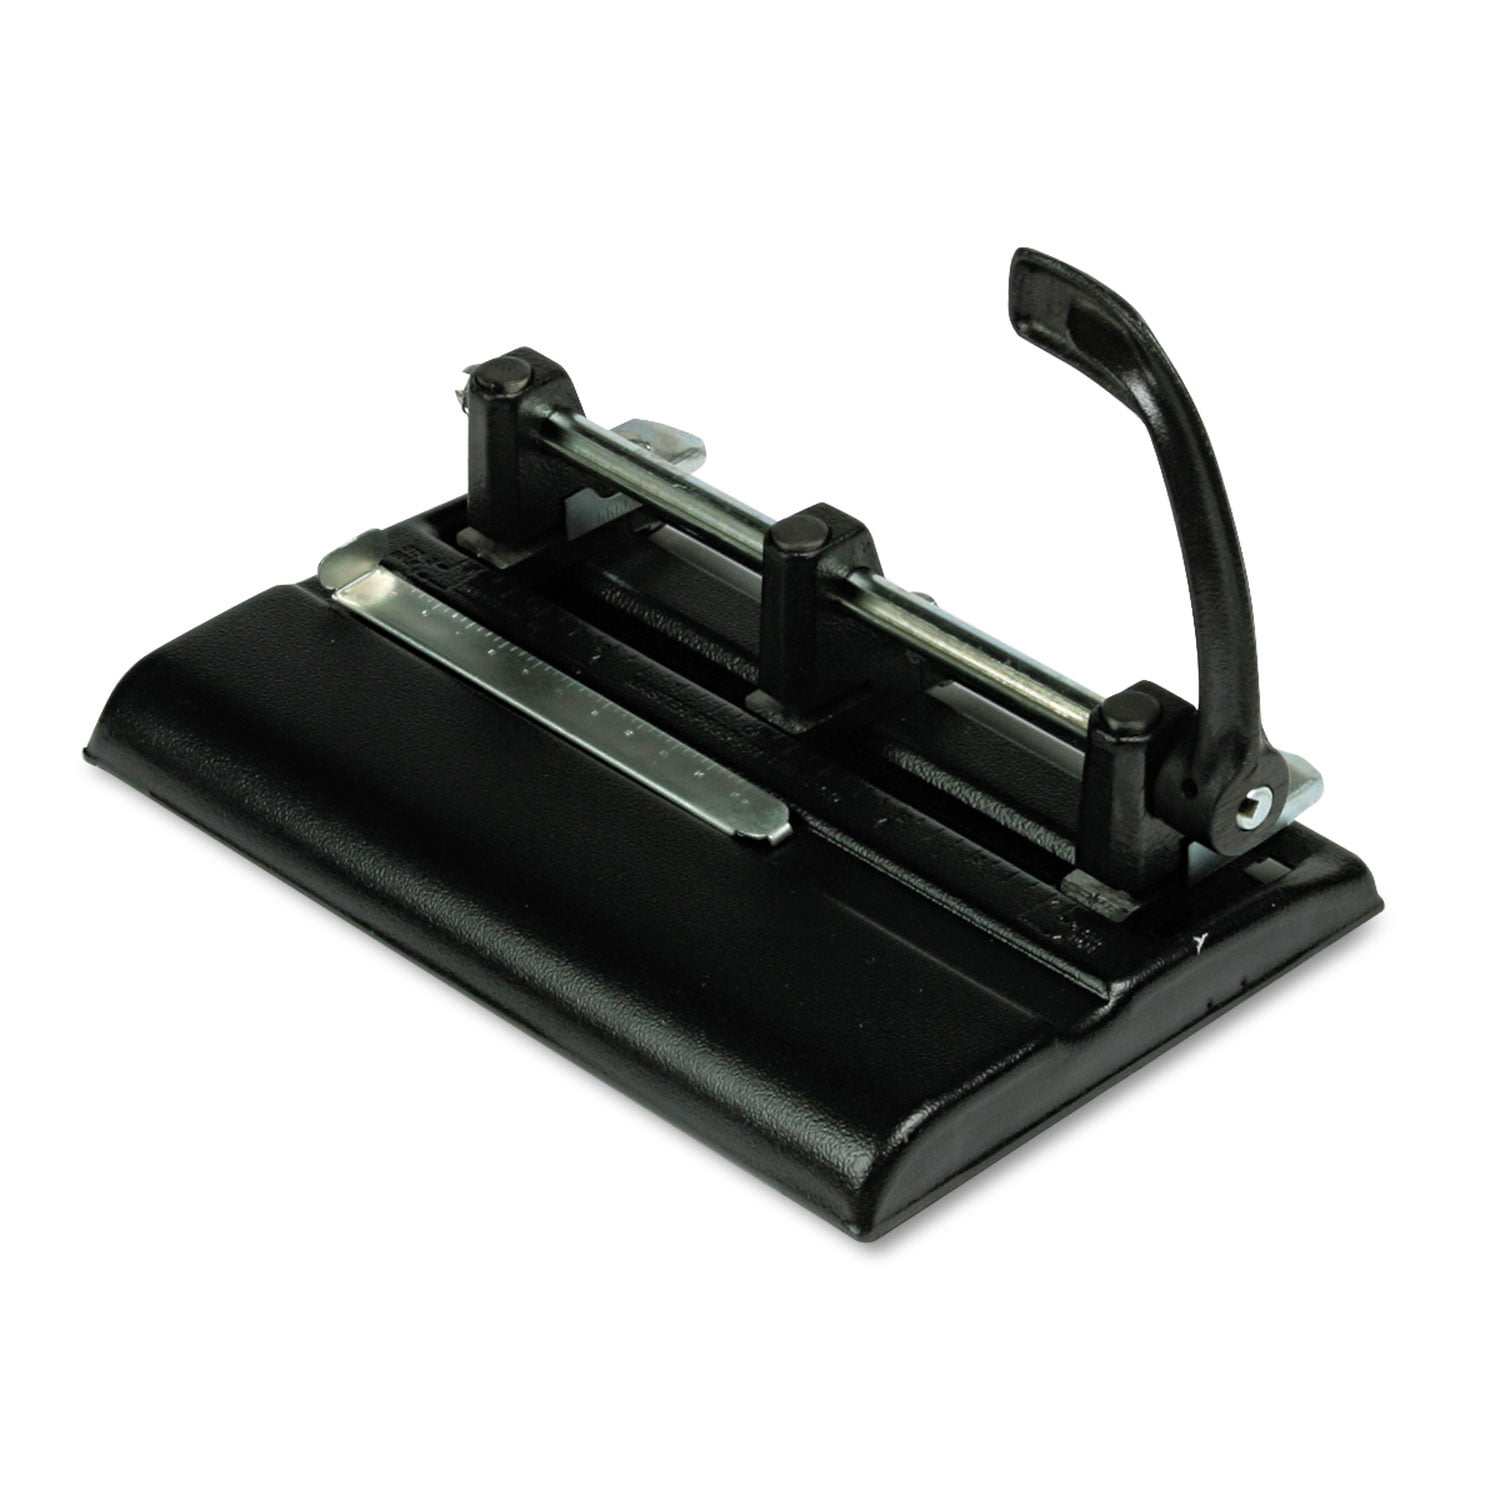 0116 3 hole Punch Heavy Duty Punch; 7mm Holes, 108mm Hole  Distance,35-Sheet, Three-Hole